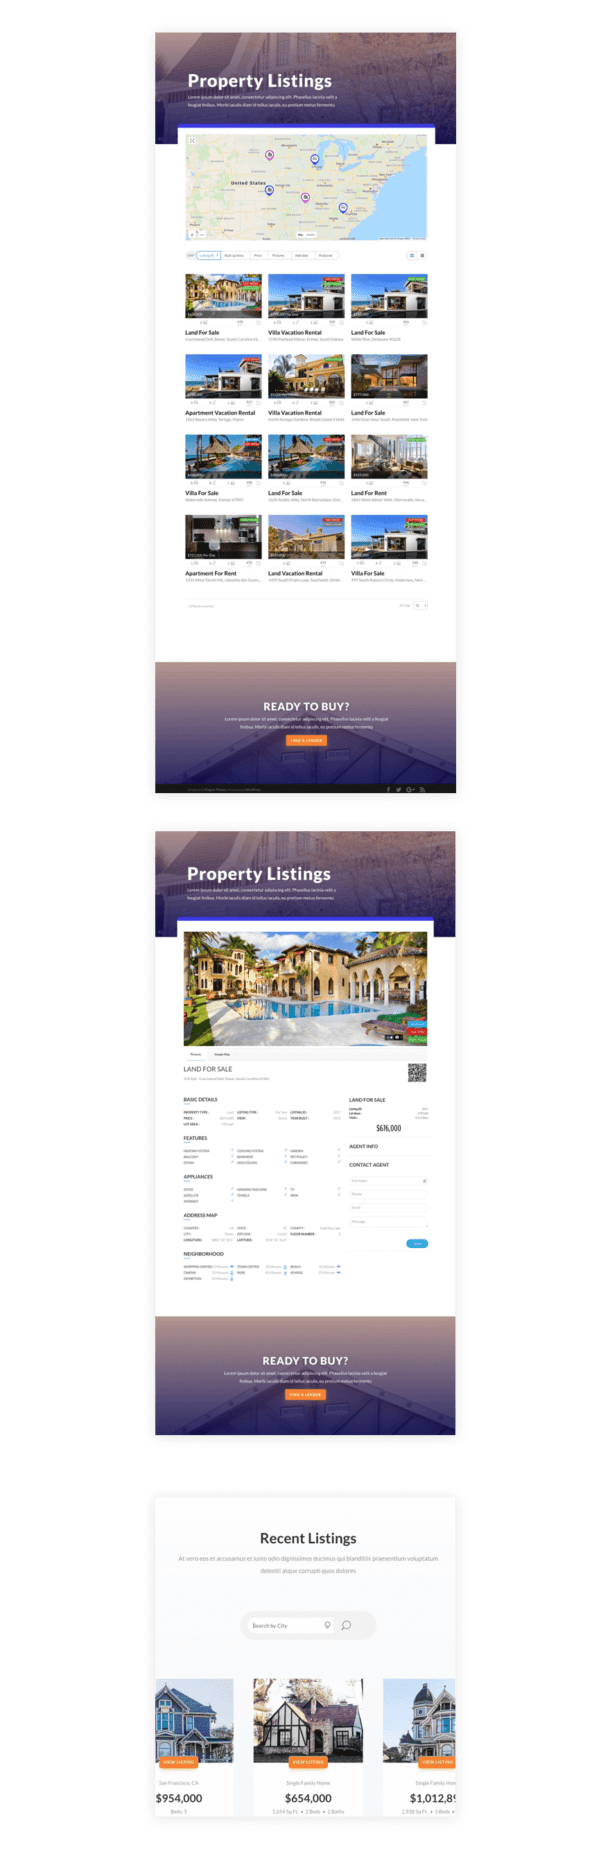 How to Add Real Estate Property Listings to Your Website with Divi